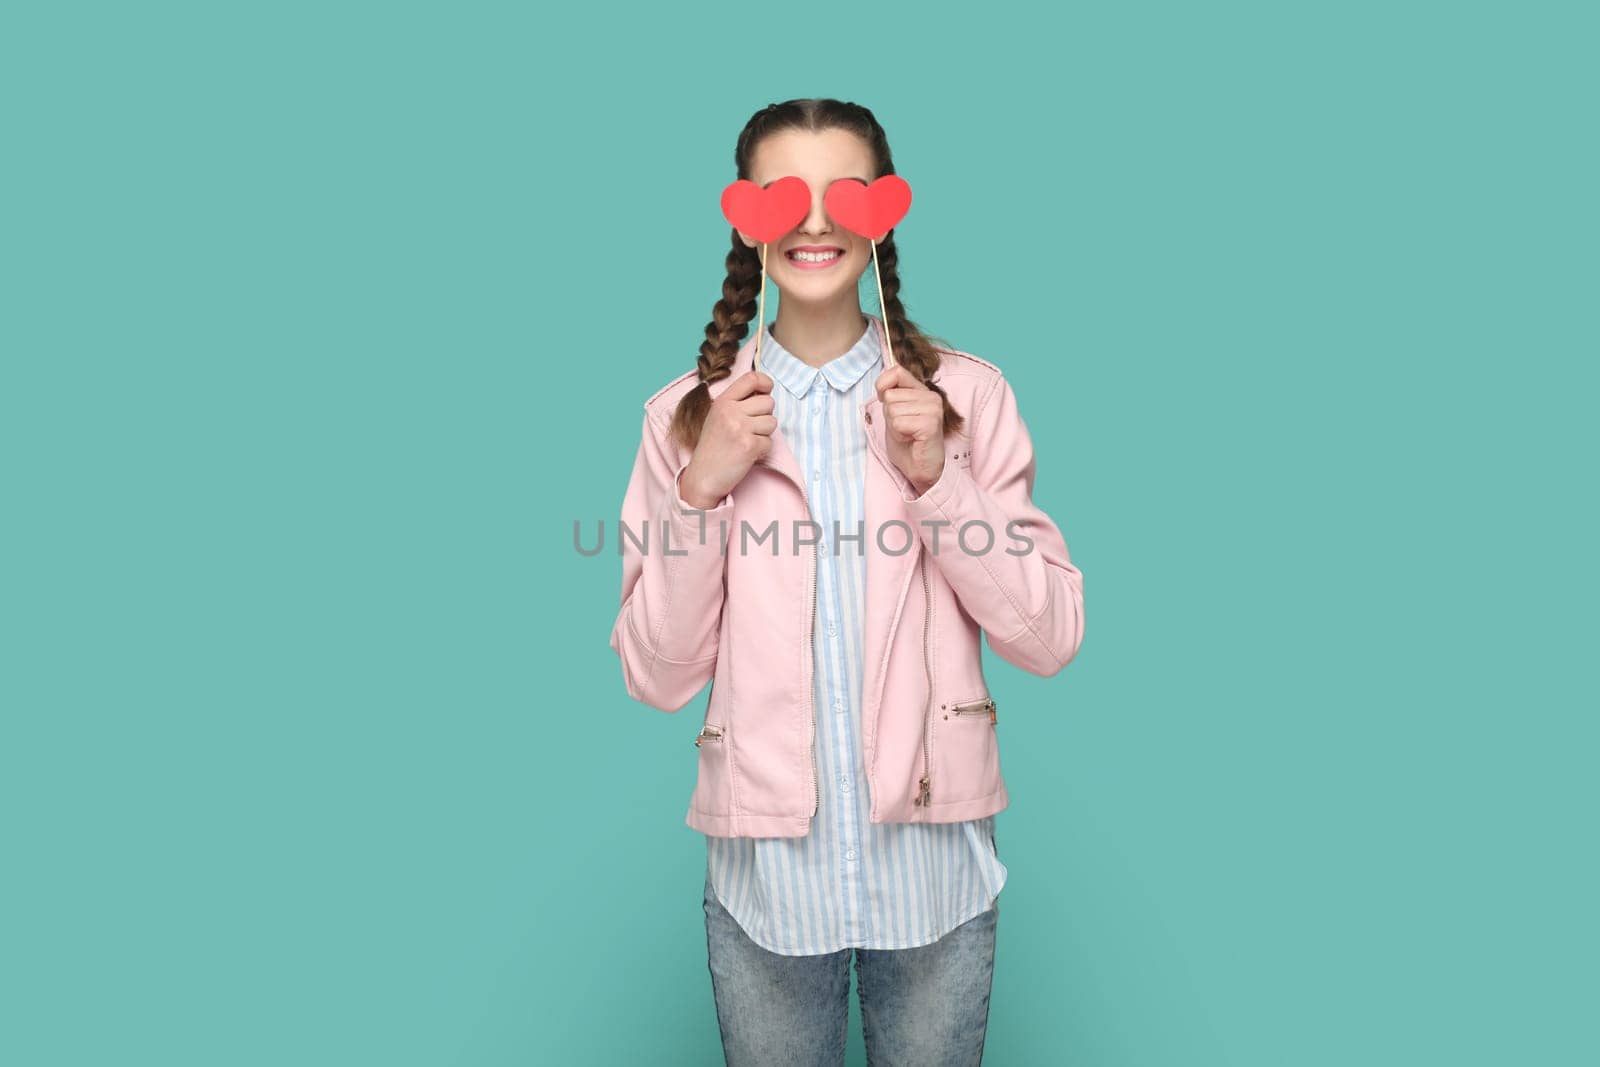 Romantic positive teenager girl with braids standing covering her eyes with two red hearts on stick. by Khosro1